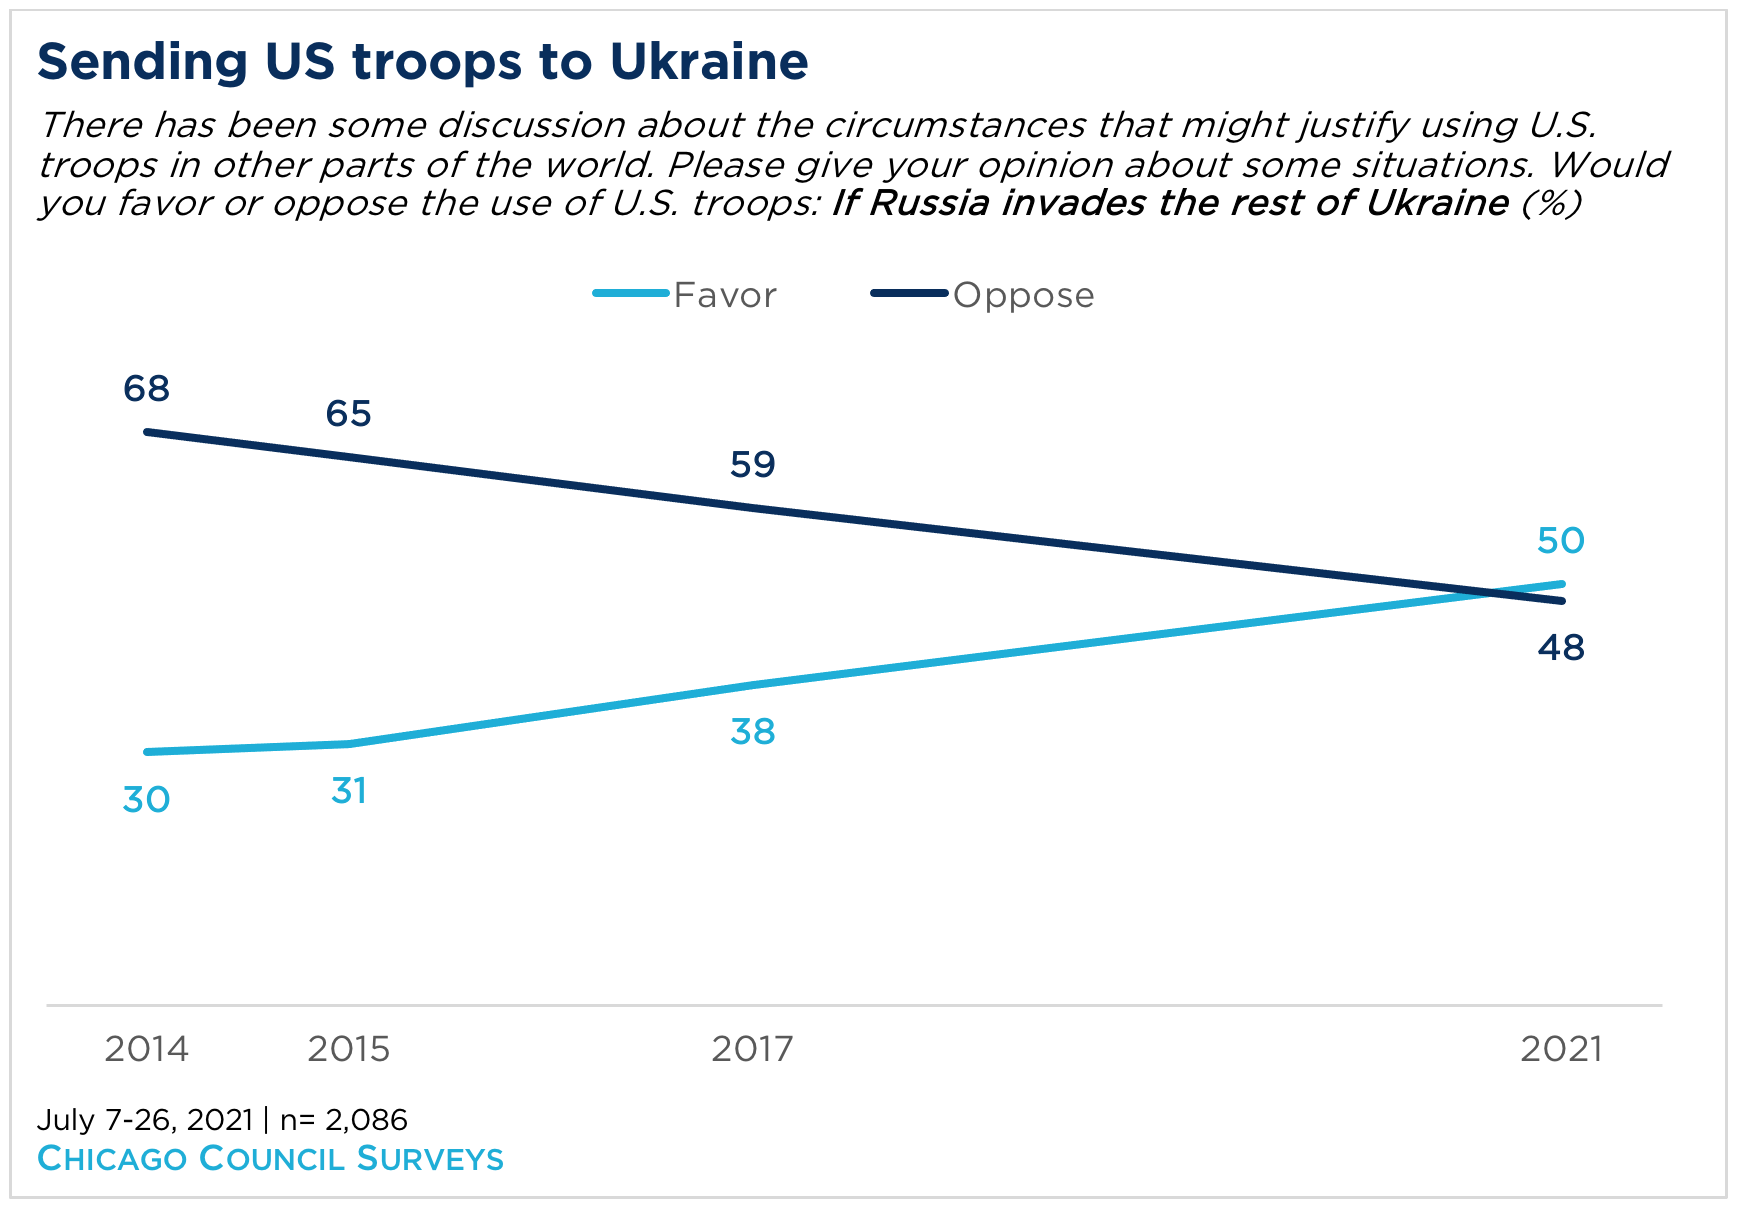 figure of public opinion in US on if Russia invades Ukraine.